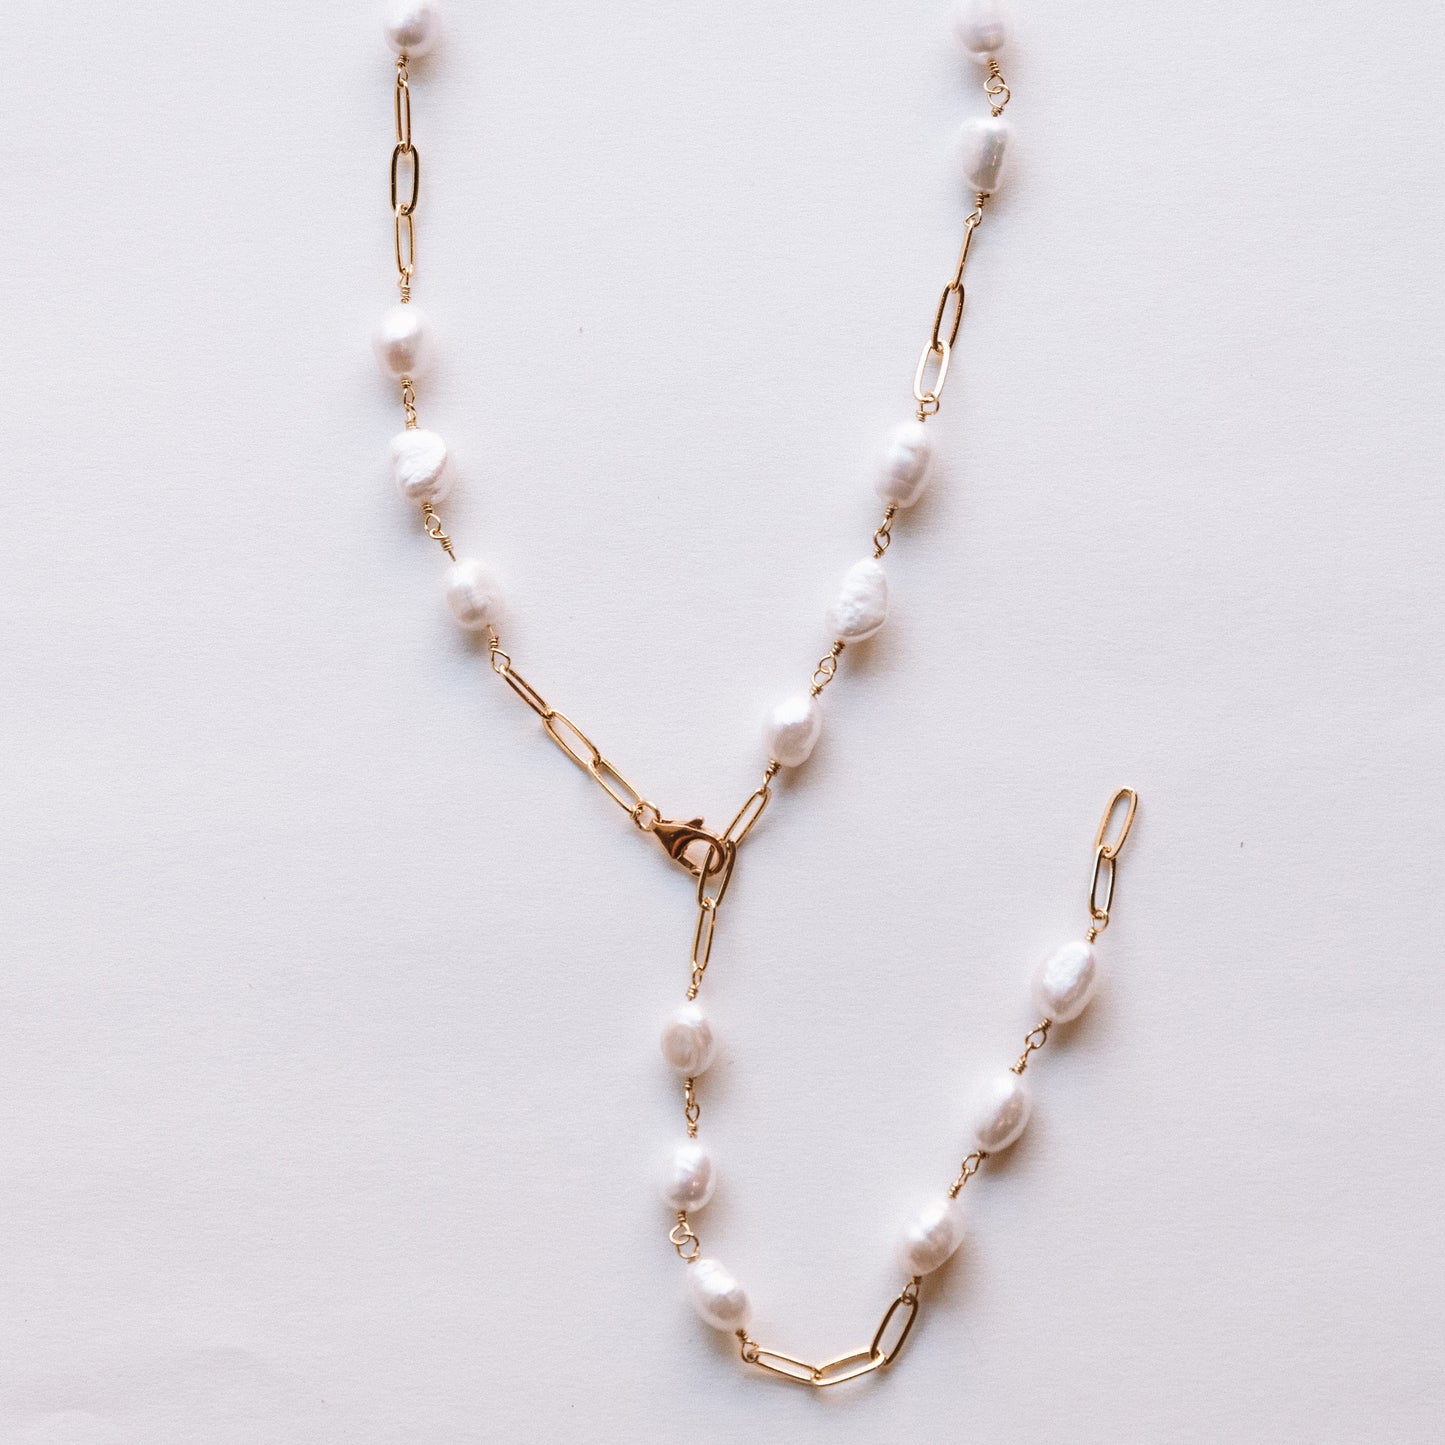 The Pearl Lariat